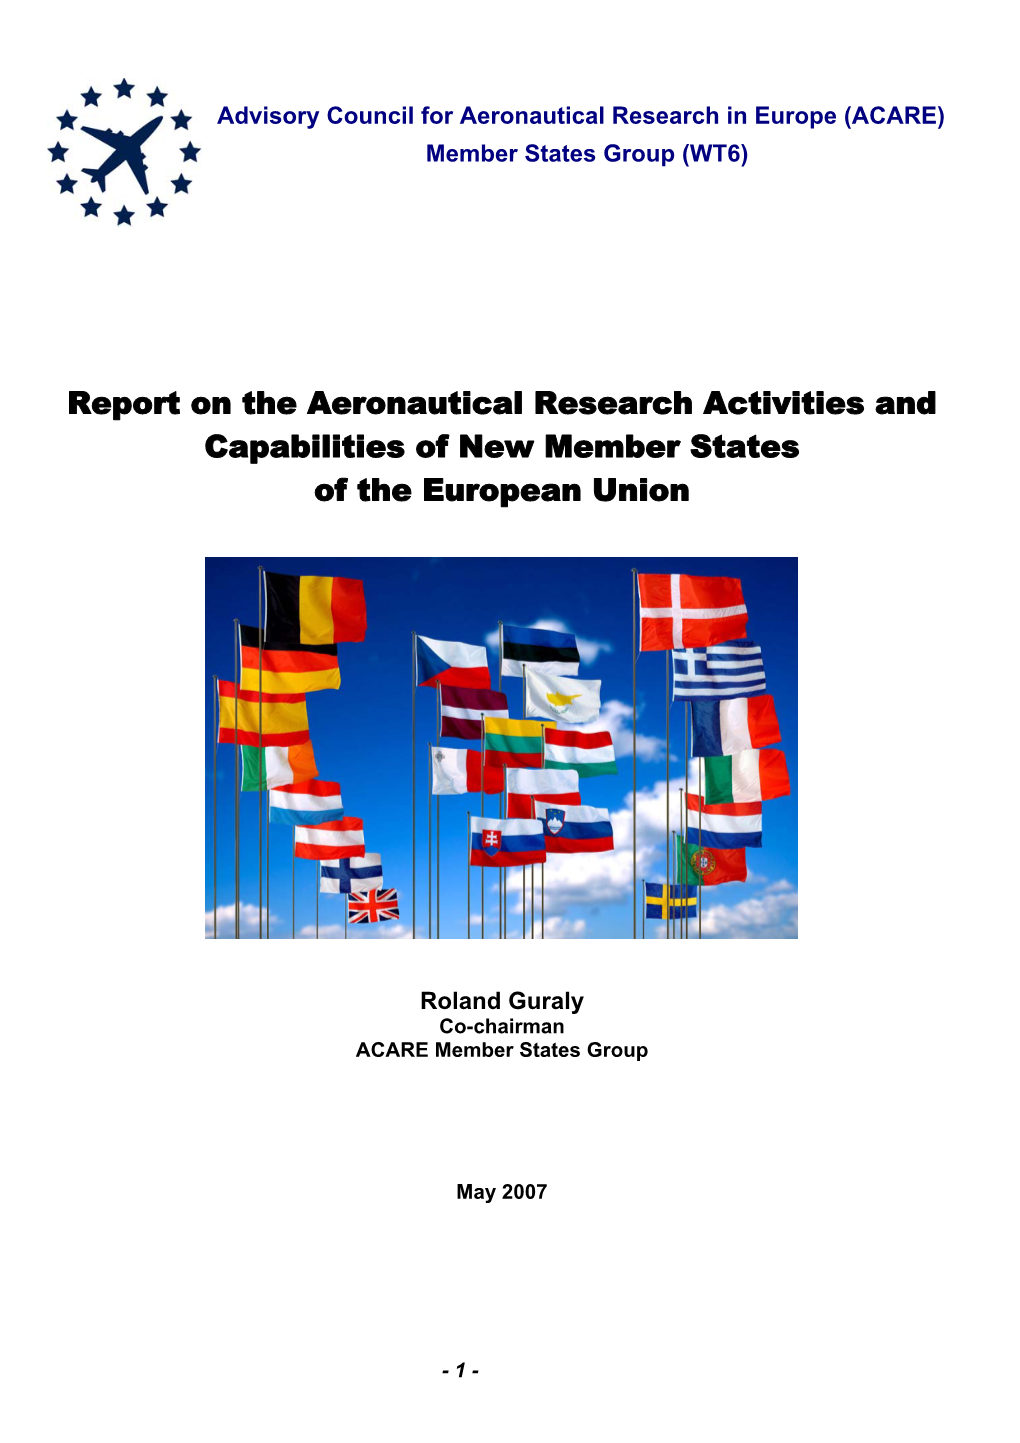 Report on the Aeronautical Research Activities and Capabilities of New Member States of the European Union